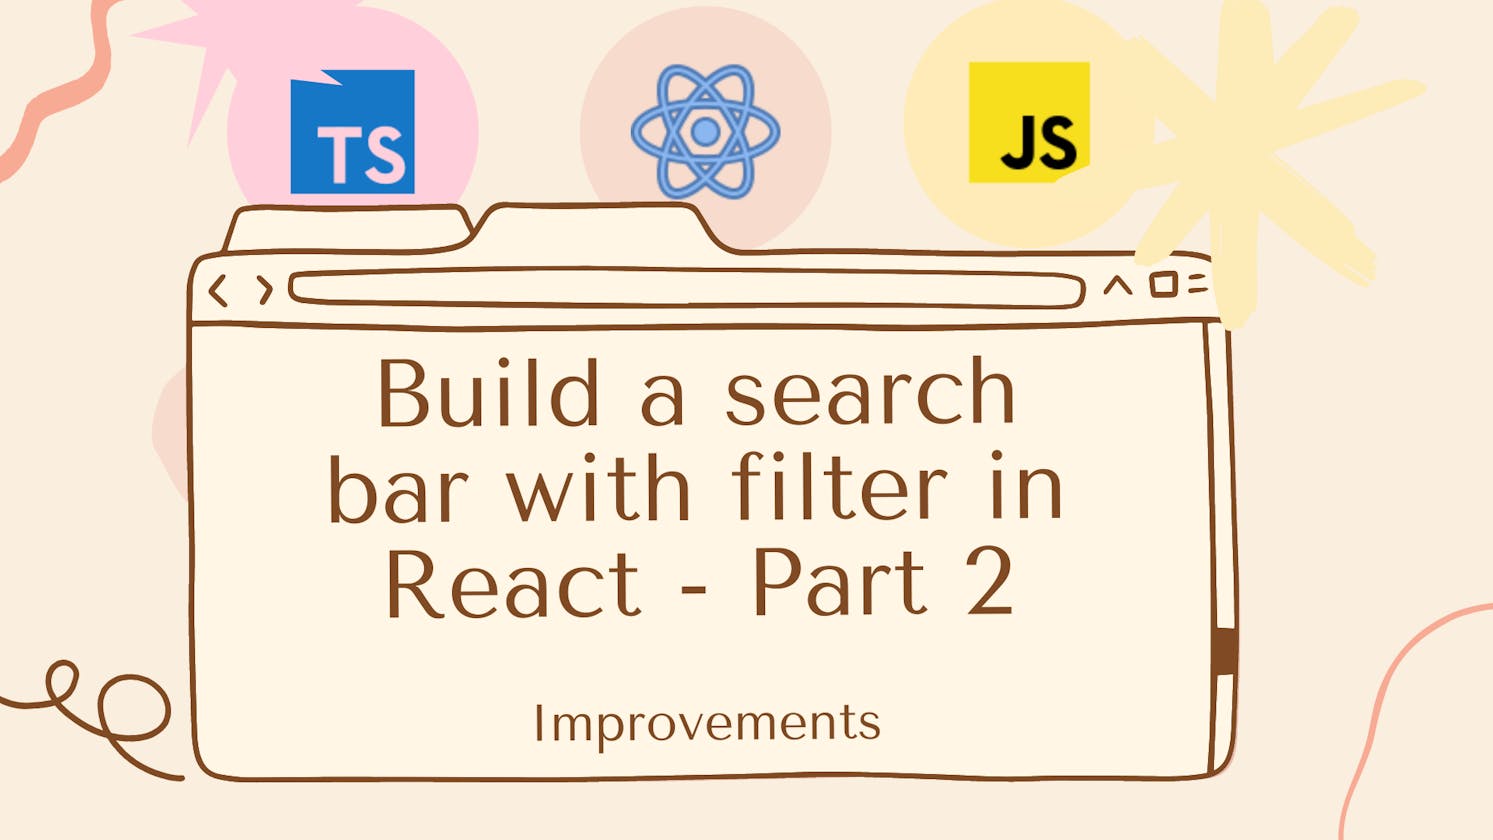 Build a search bar with filter in React - Part 2